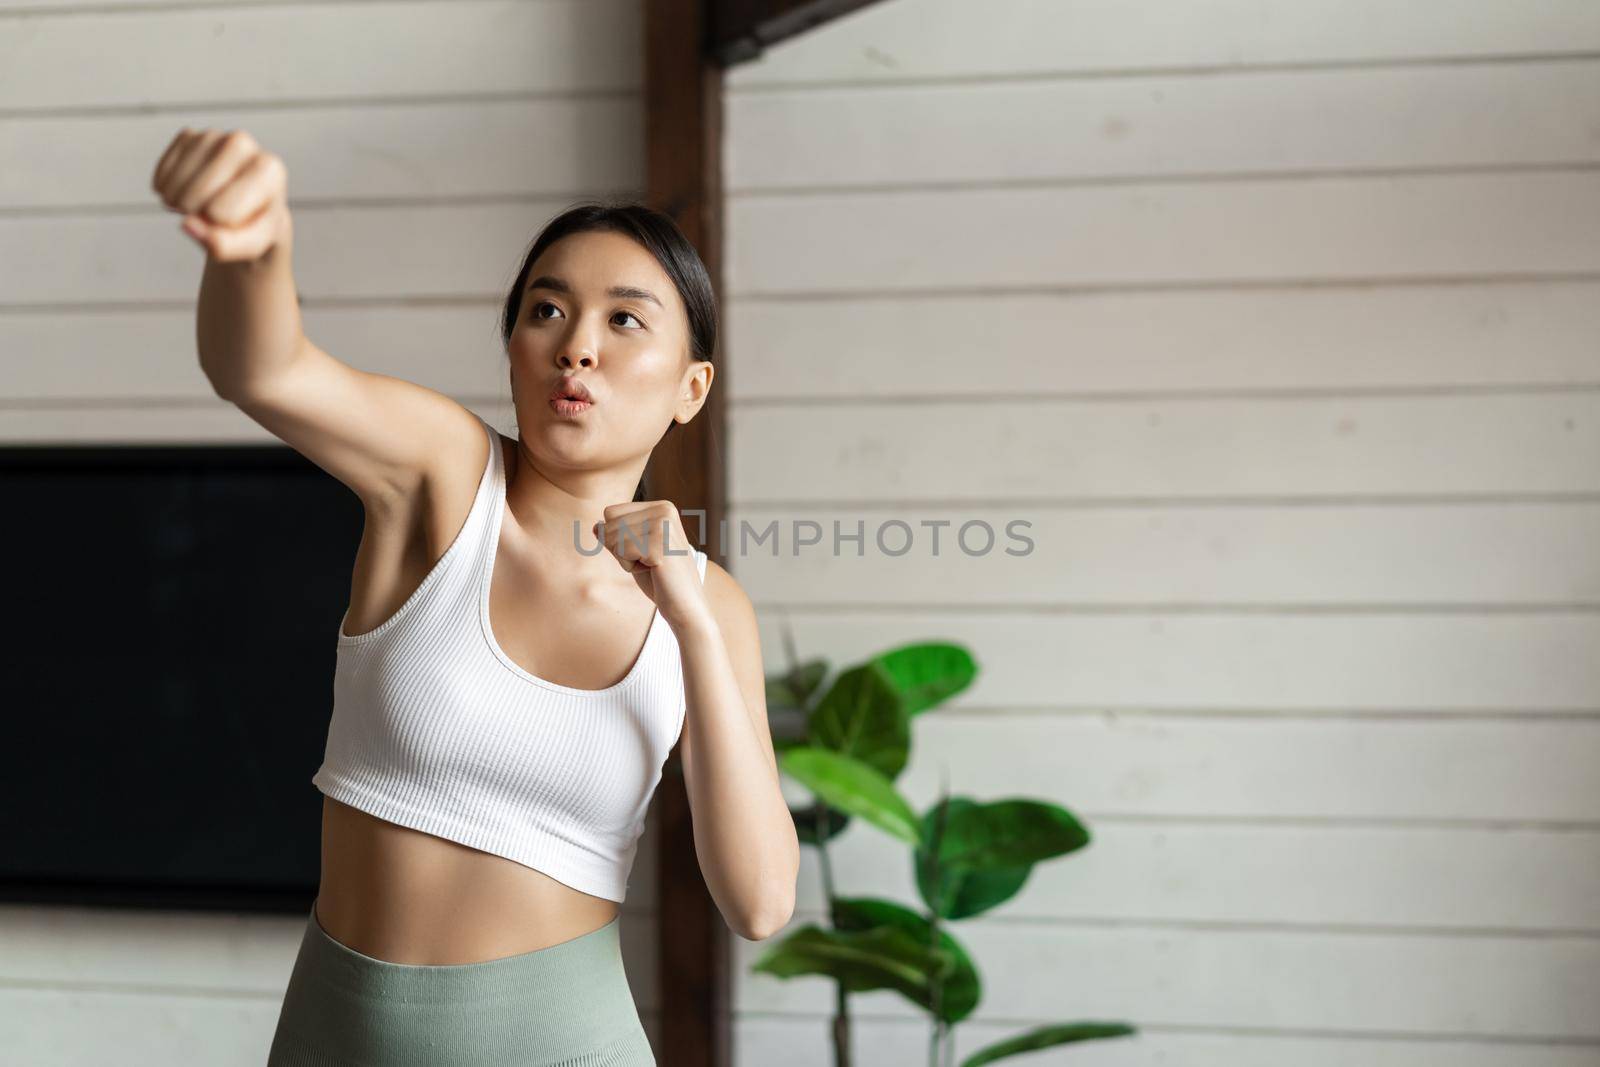 Fitness girl doing her workout at home. Asian athletic woman practice punches, wearing sport clothing.